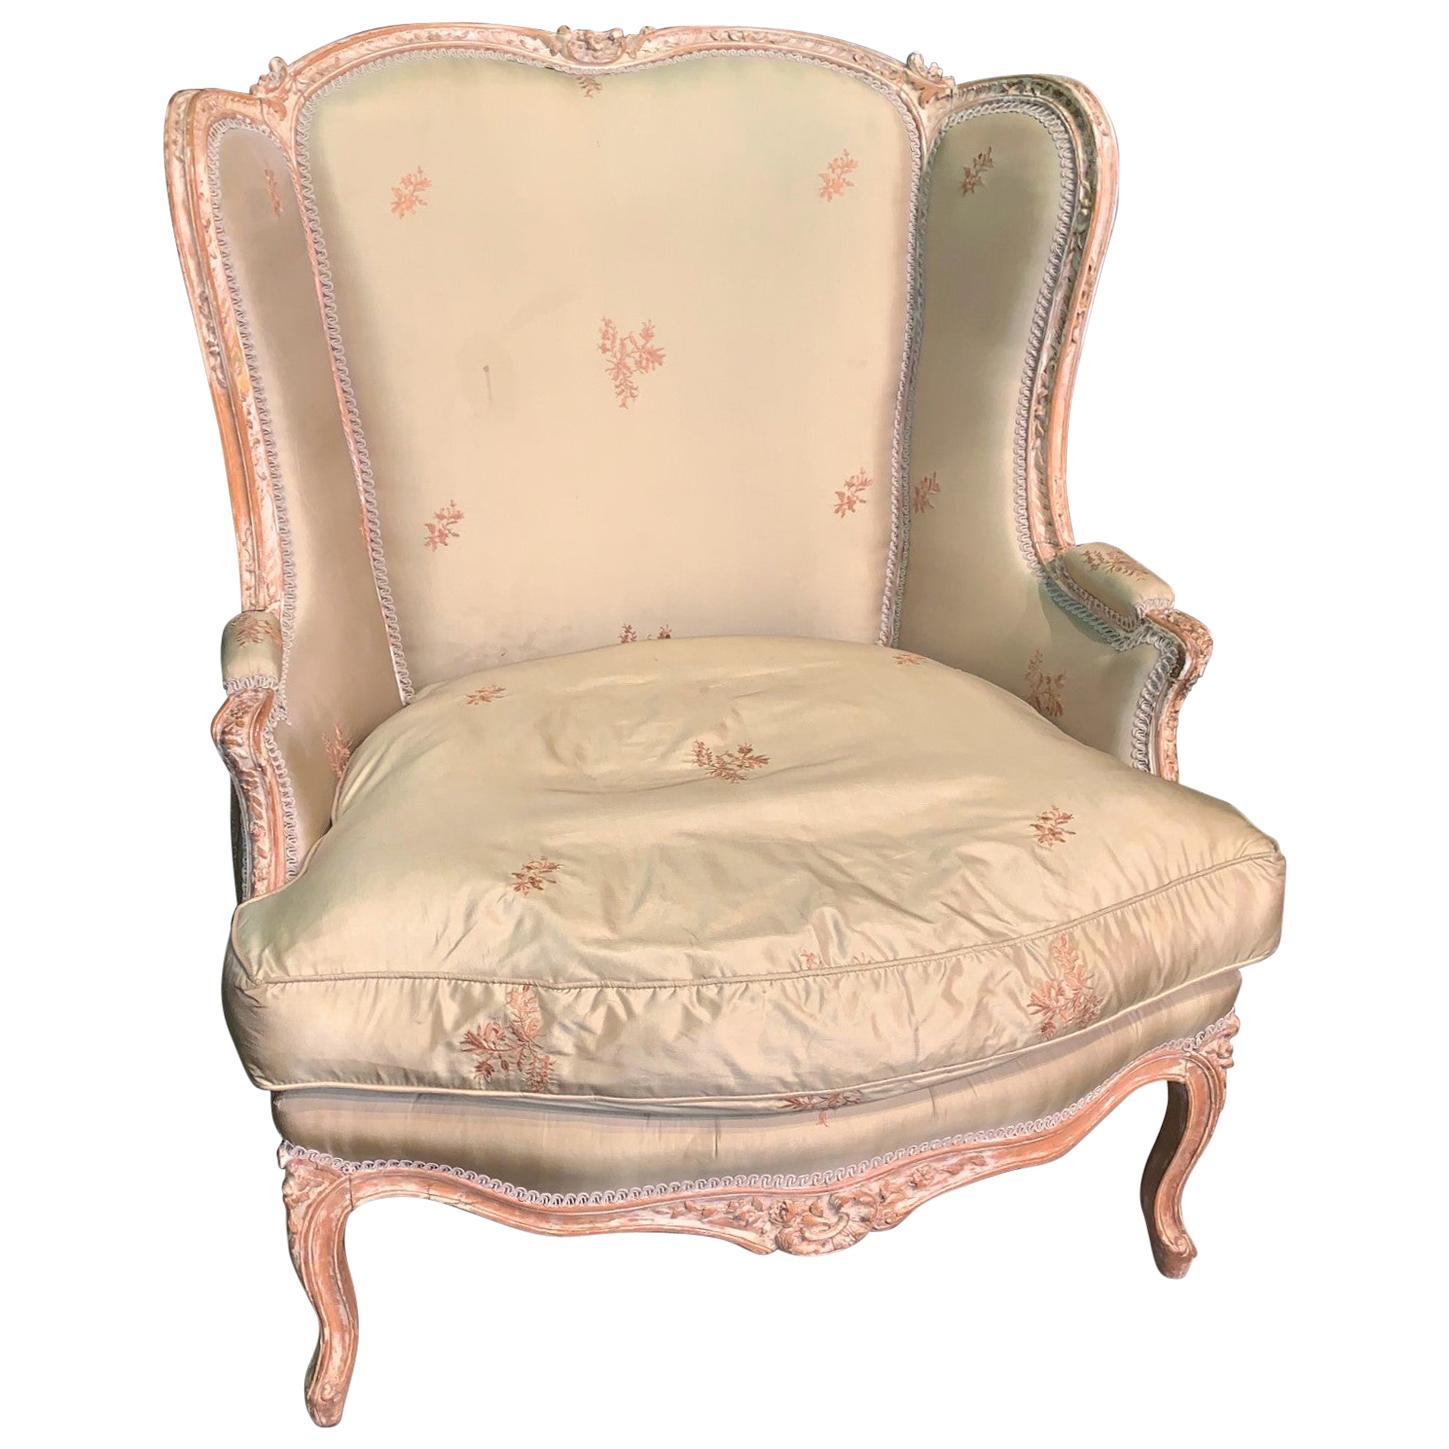 19th Century French Louis XV Upholstered Wingback Chair